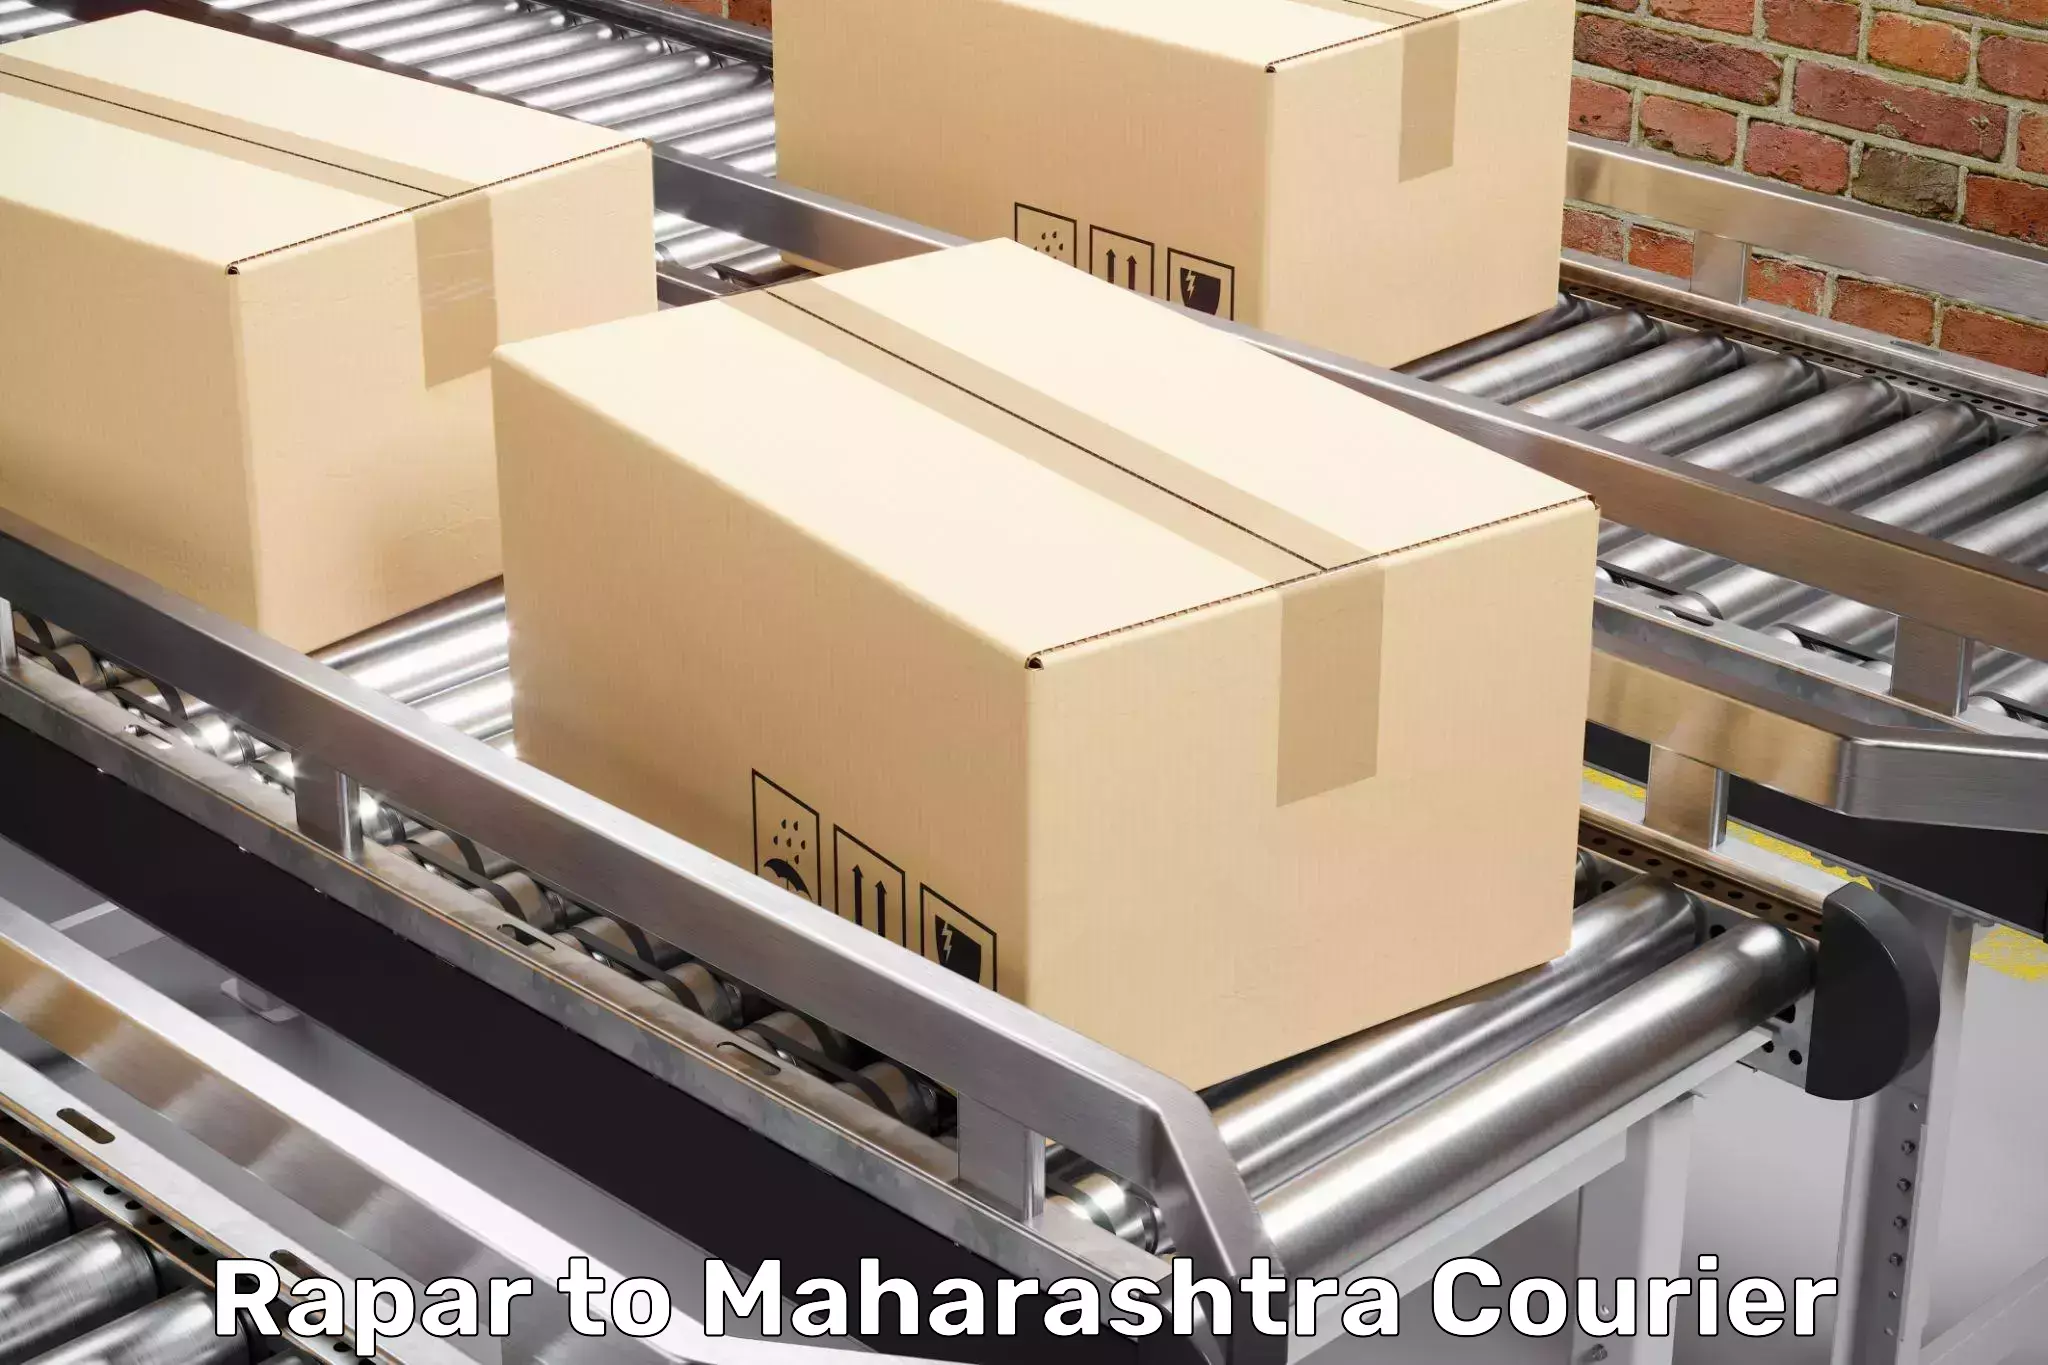 Professional moving assistance in Rapar to Pimpri Chinchwad